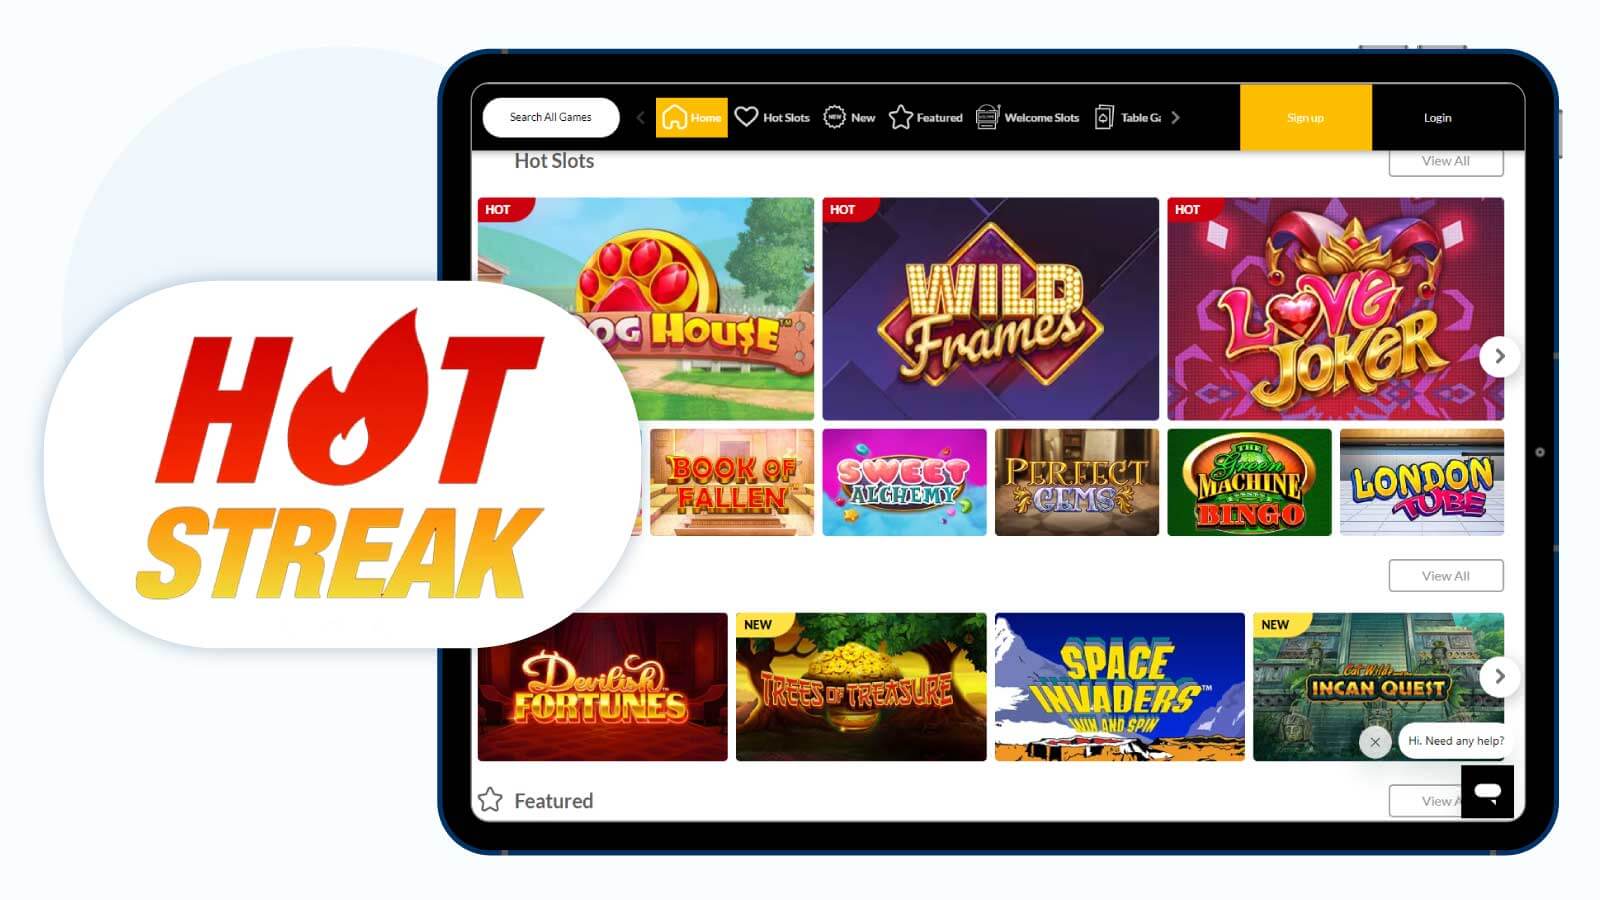 Hot Streak Casino – Outstanding New Grace Media Limited Casino for Slots Players